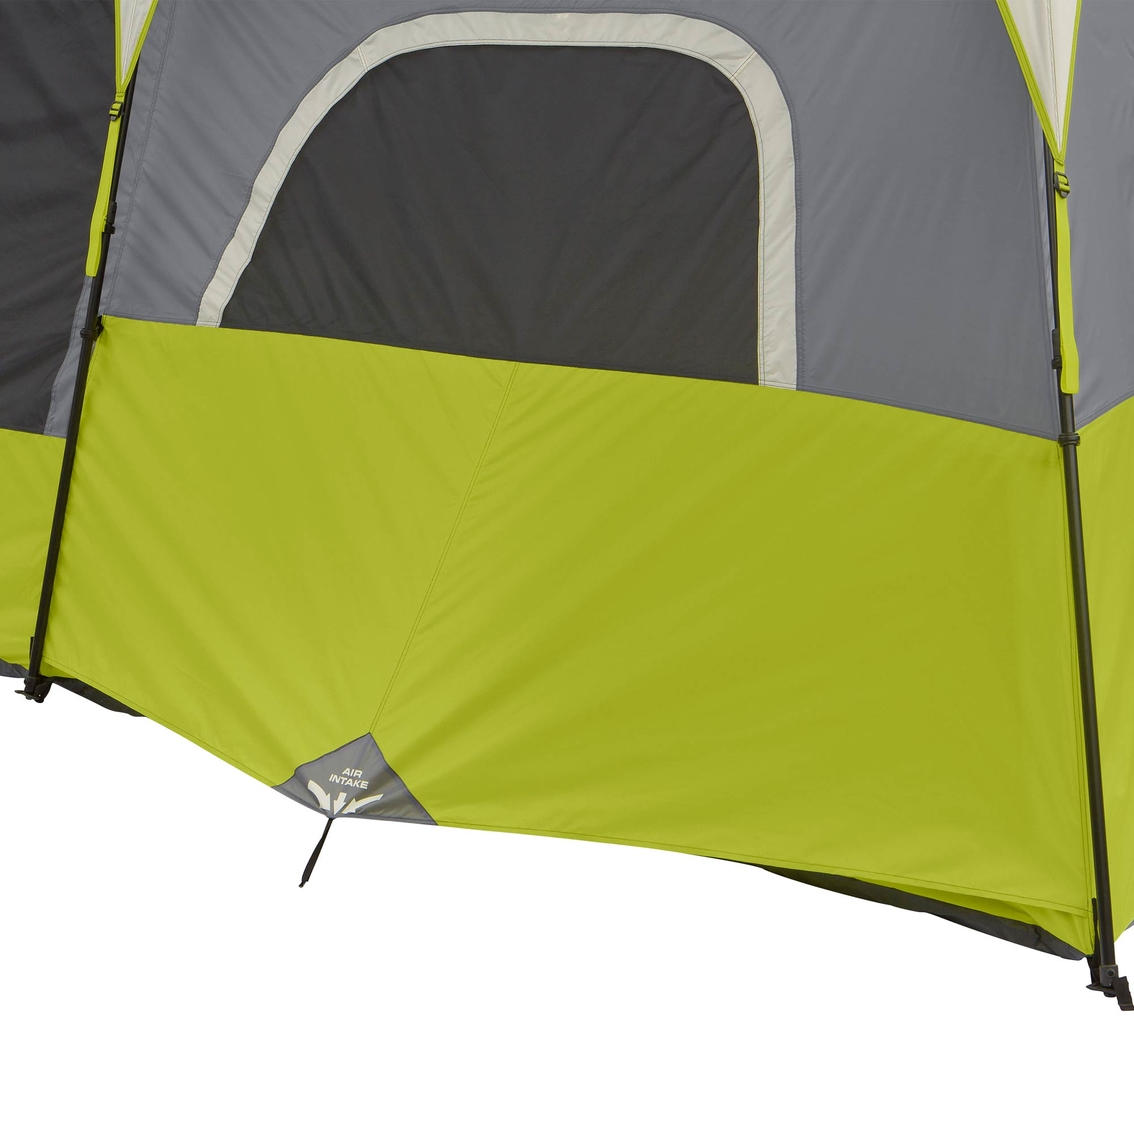 Core Equipment 9 Person Instant Cabin Tent - Image 6 of 10